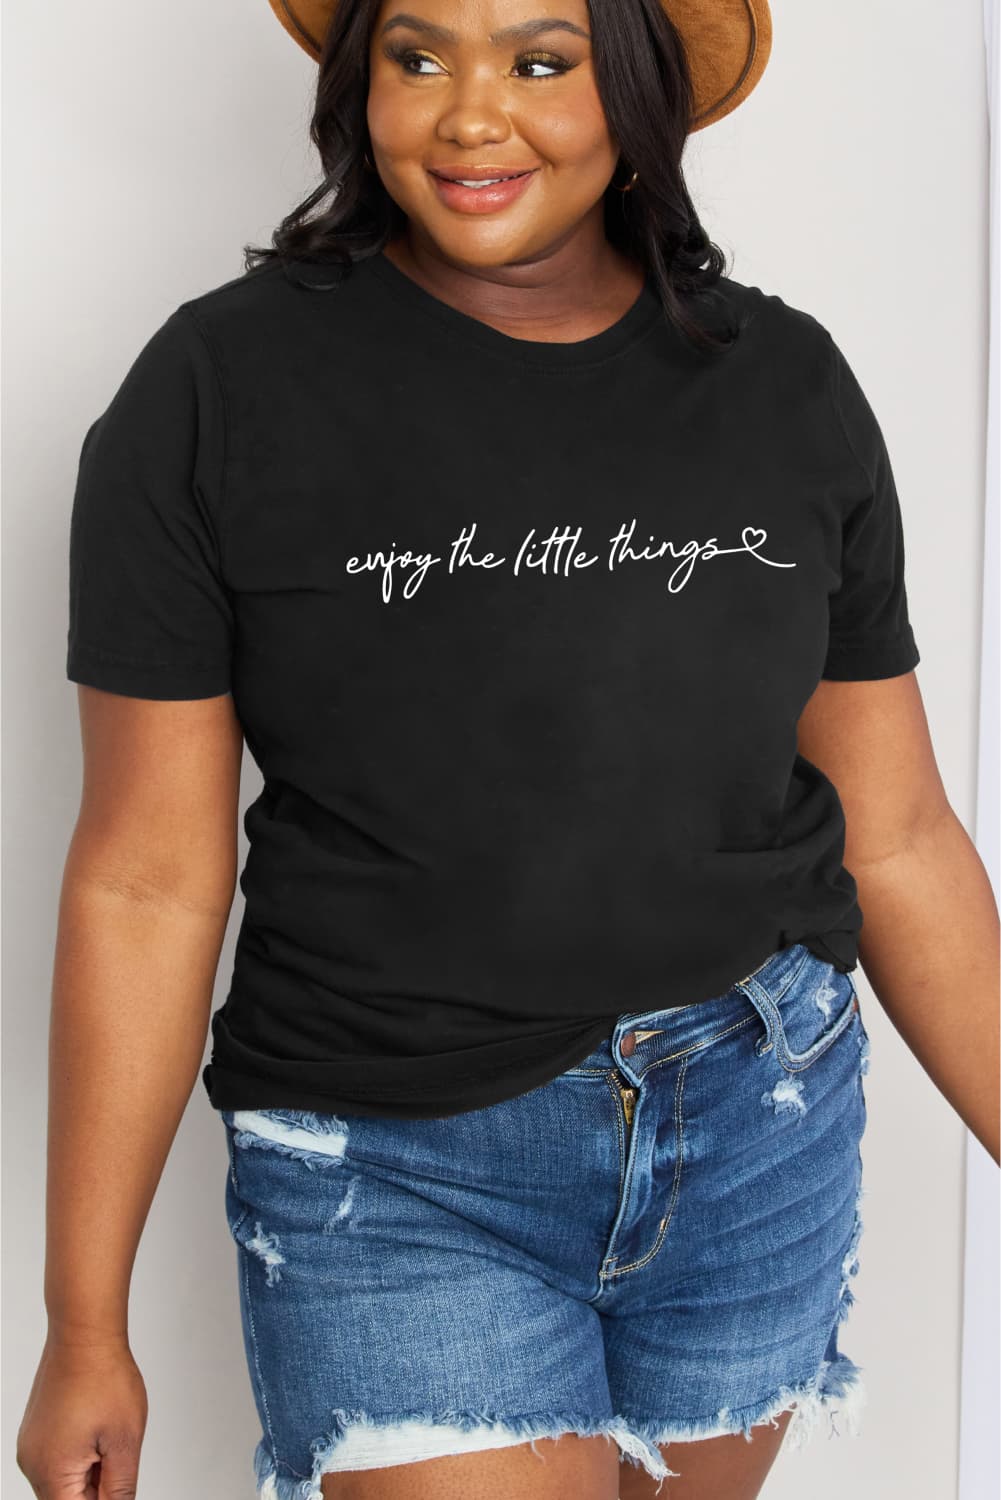 ENJOY THE LITTLE THINGS Graphic Cotton Tee